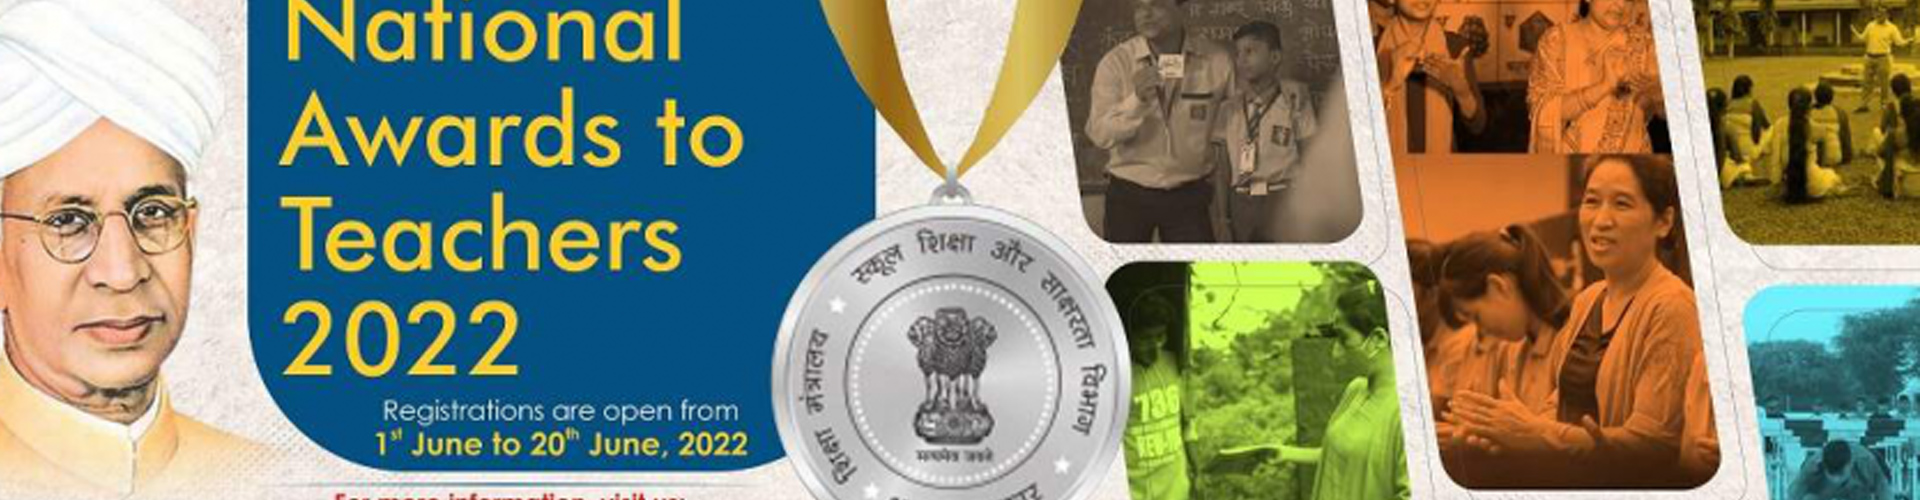 Image of National Awards to Teachers 2022 